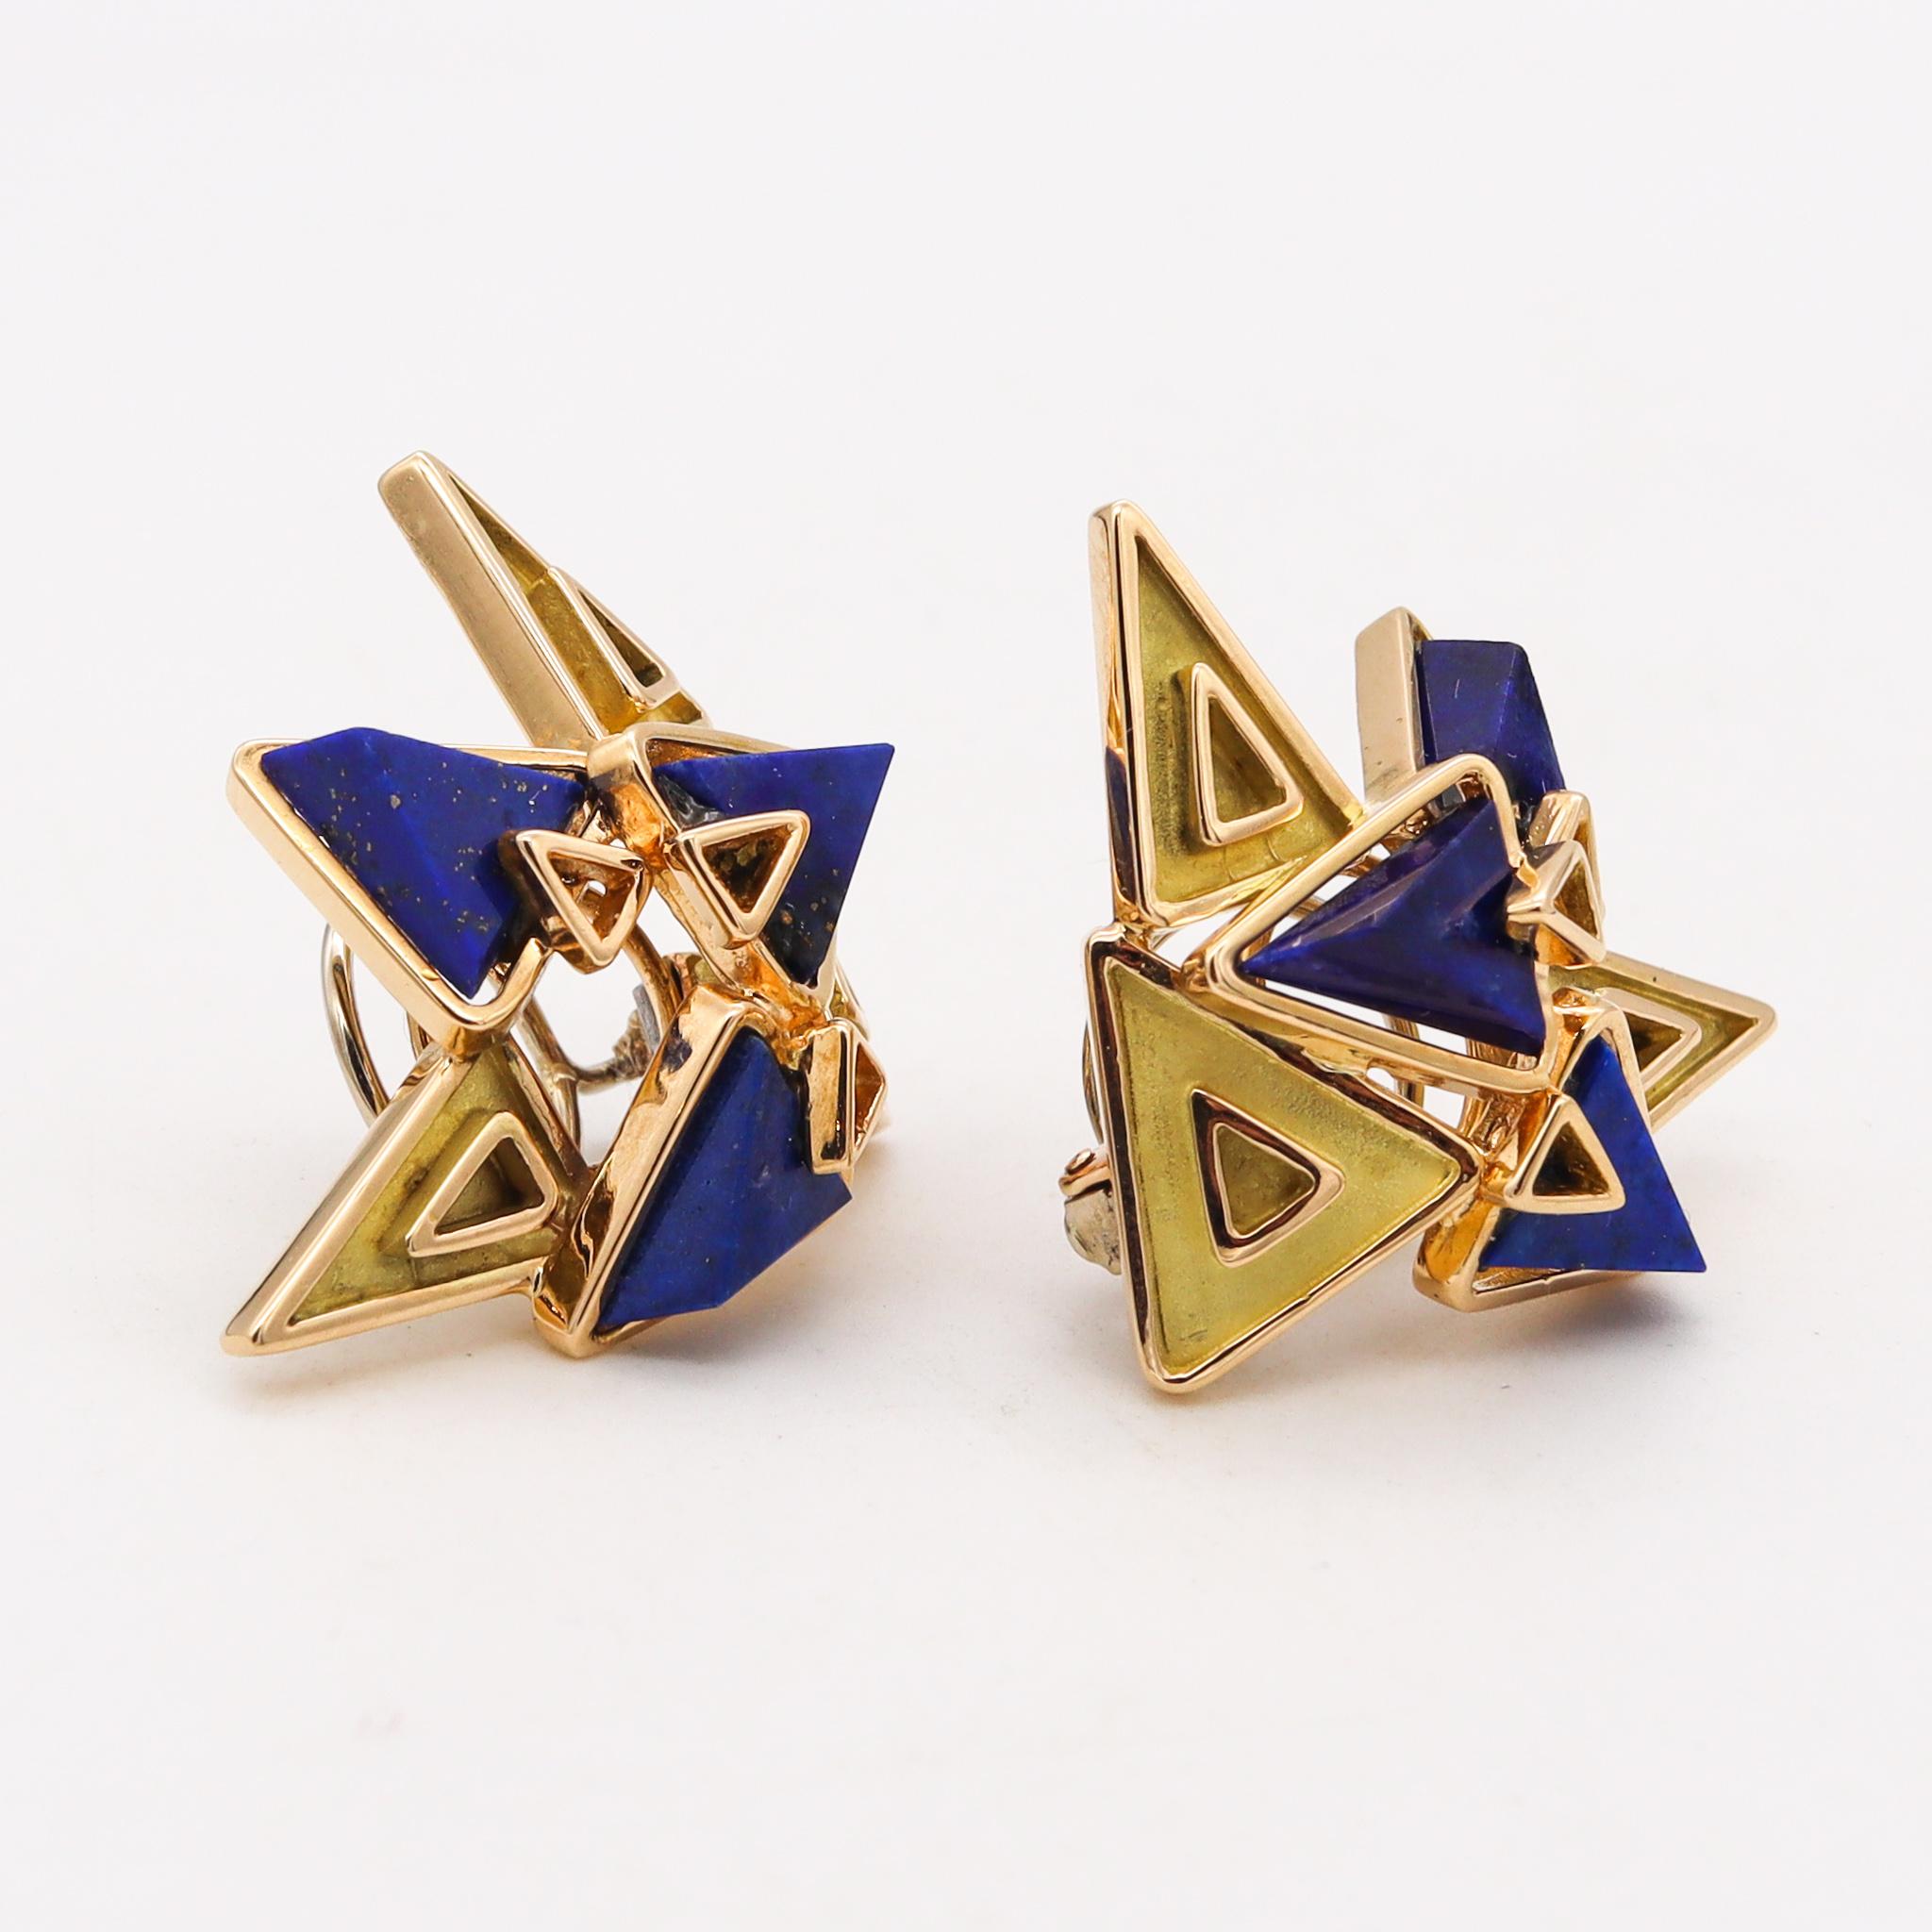 Modernist Chaumet Paris 1970 Rare Geometric Clip-on Earrings 18Kt Gold With Carved Lapis For Sale